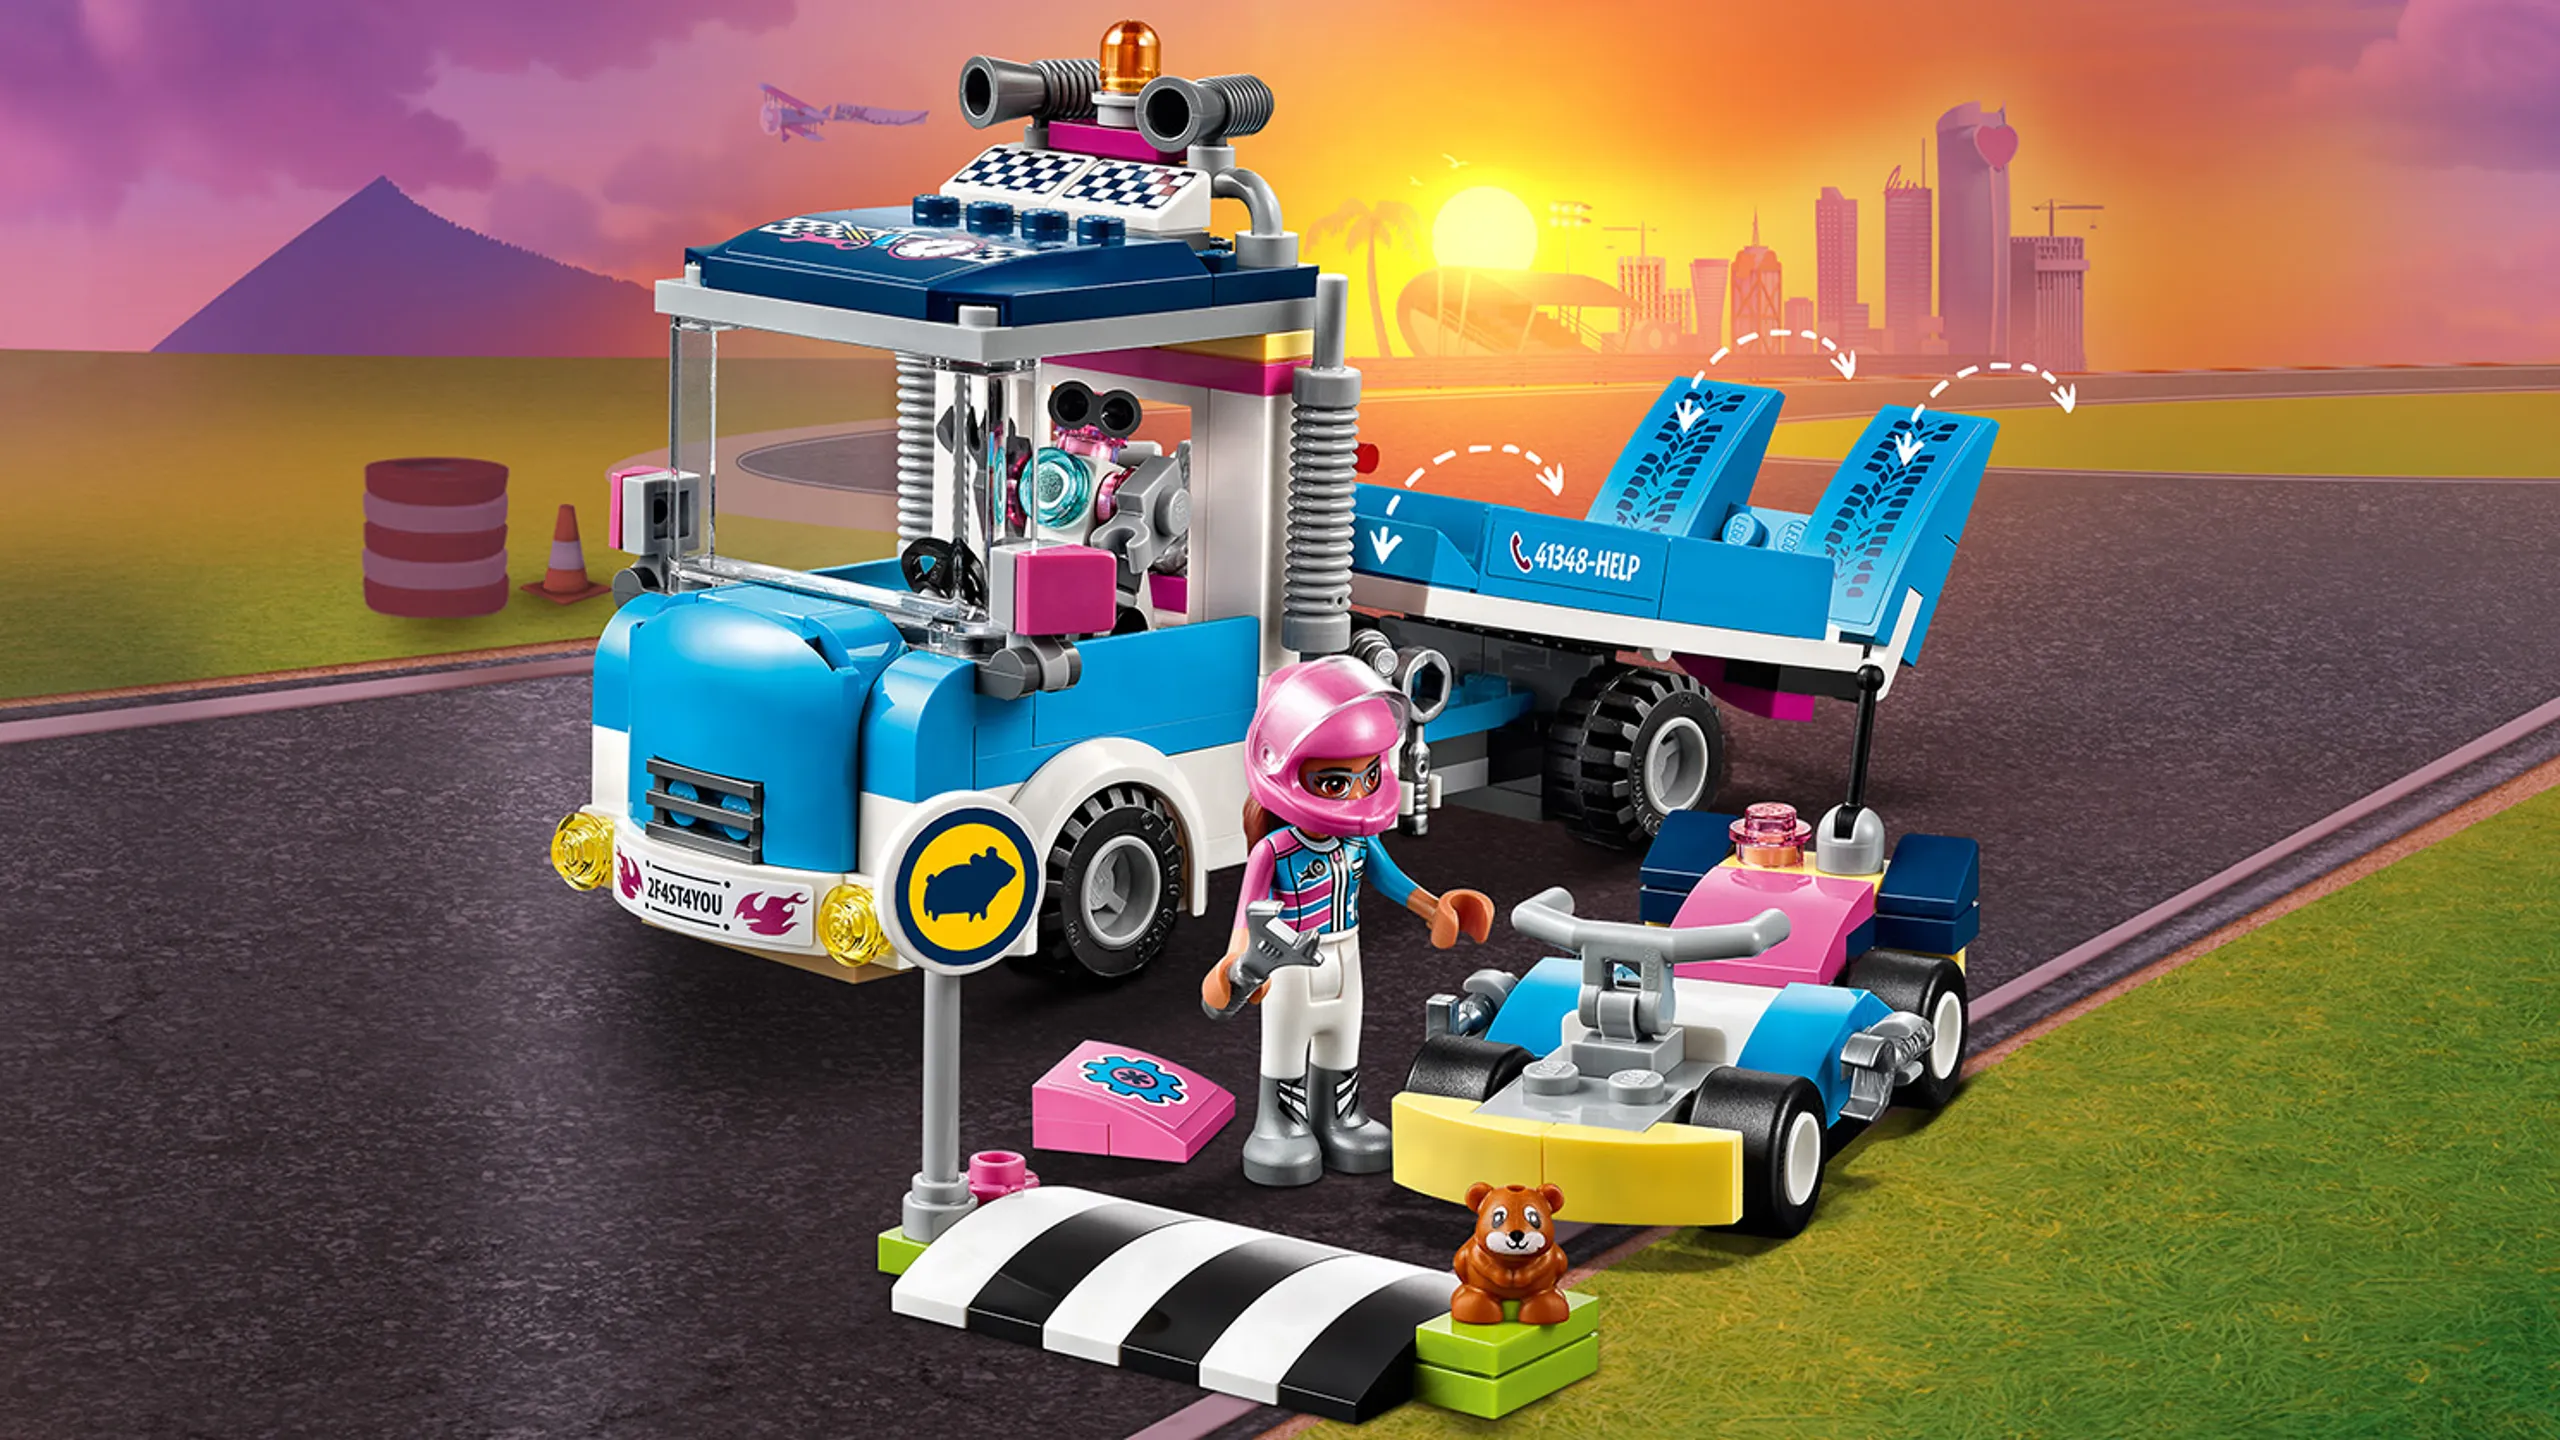 LEGO Friends - 41348 Service & Care Truck - Olivia transports and fixes her go cart with the service and care truck.